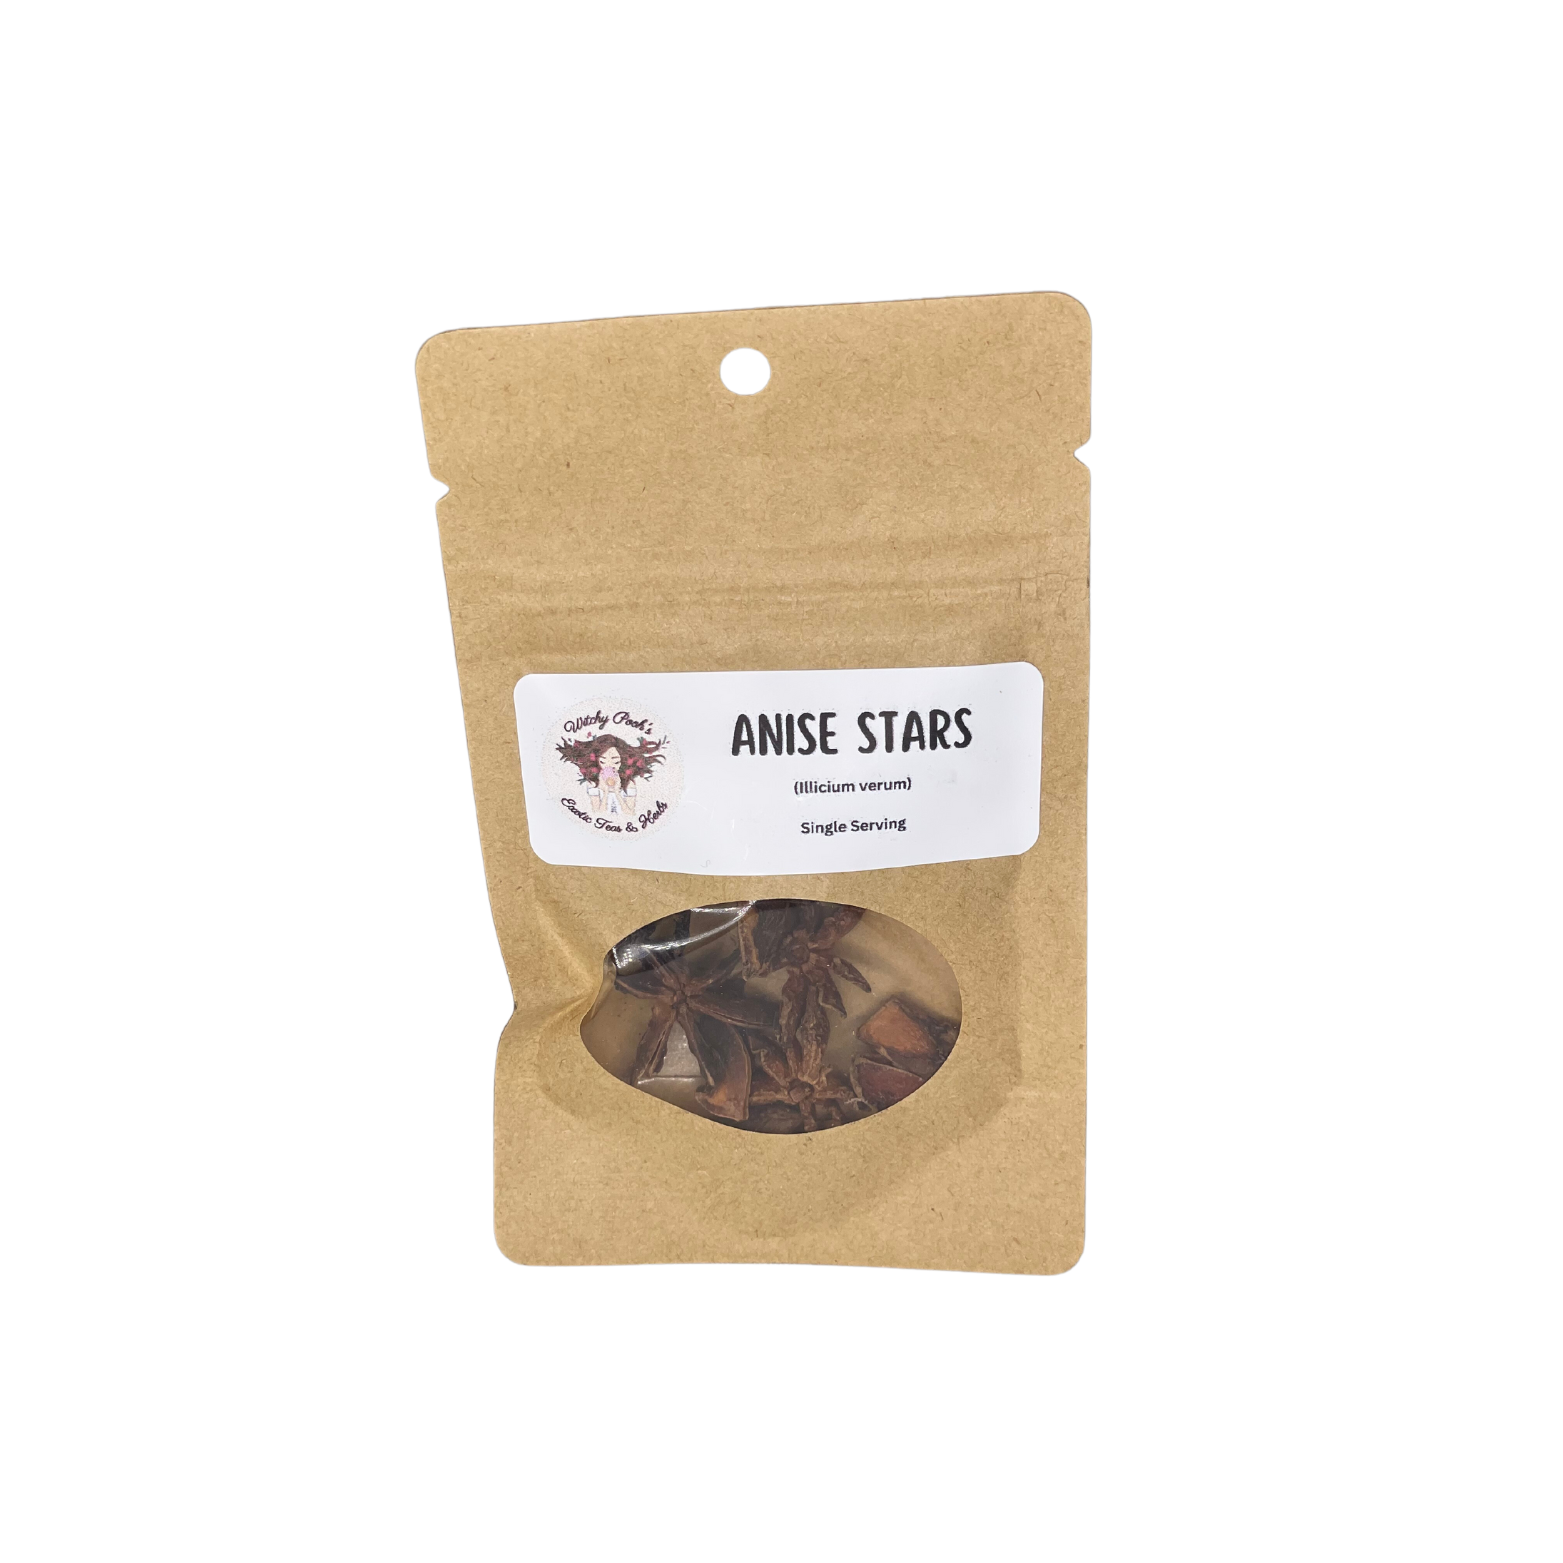 Witchy Pooh's Anise Stars Whole High Quality Strong Smell for Simmer Pots, Cooking and Ritual-16